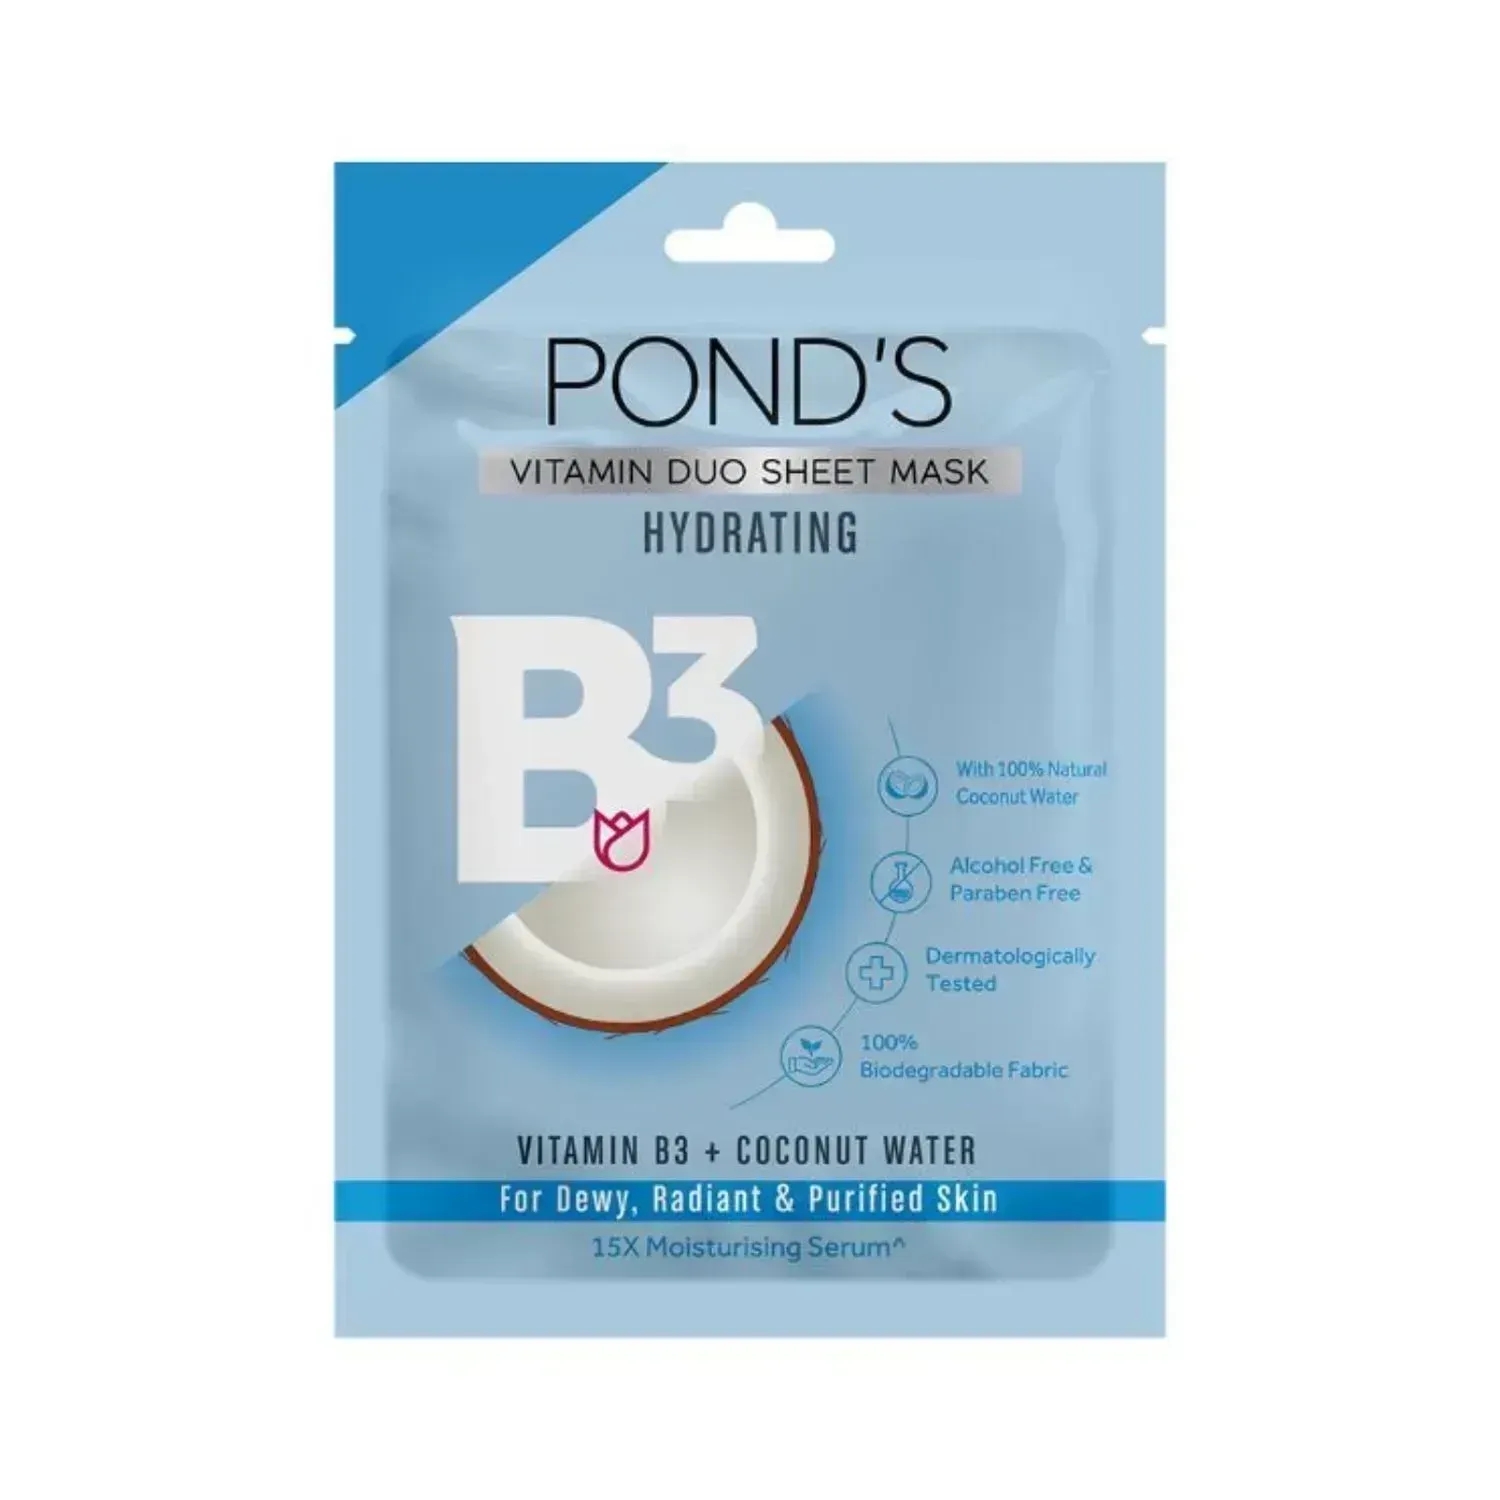 Pond's | Pond's Hydrating Dewy Radiant Skin With 100% Natural Coconut Water & Vitamin B3 Sheet Mask - (25ml)